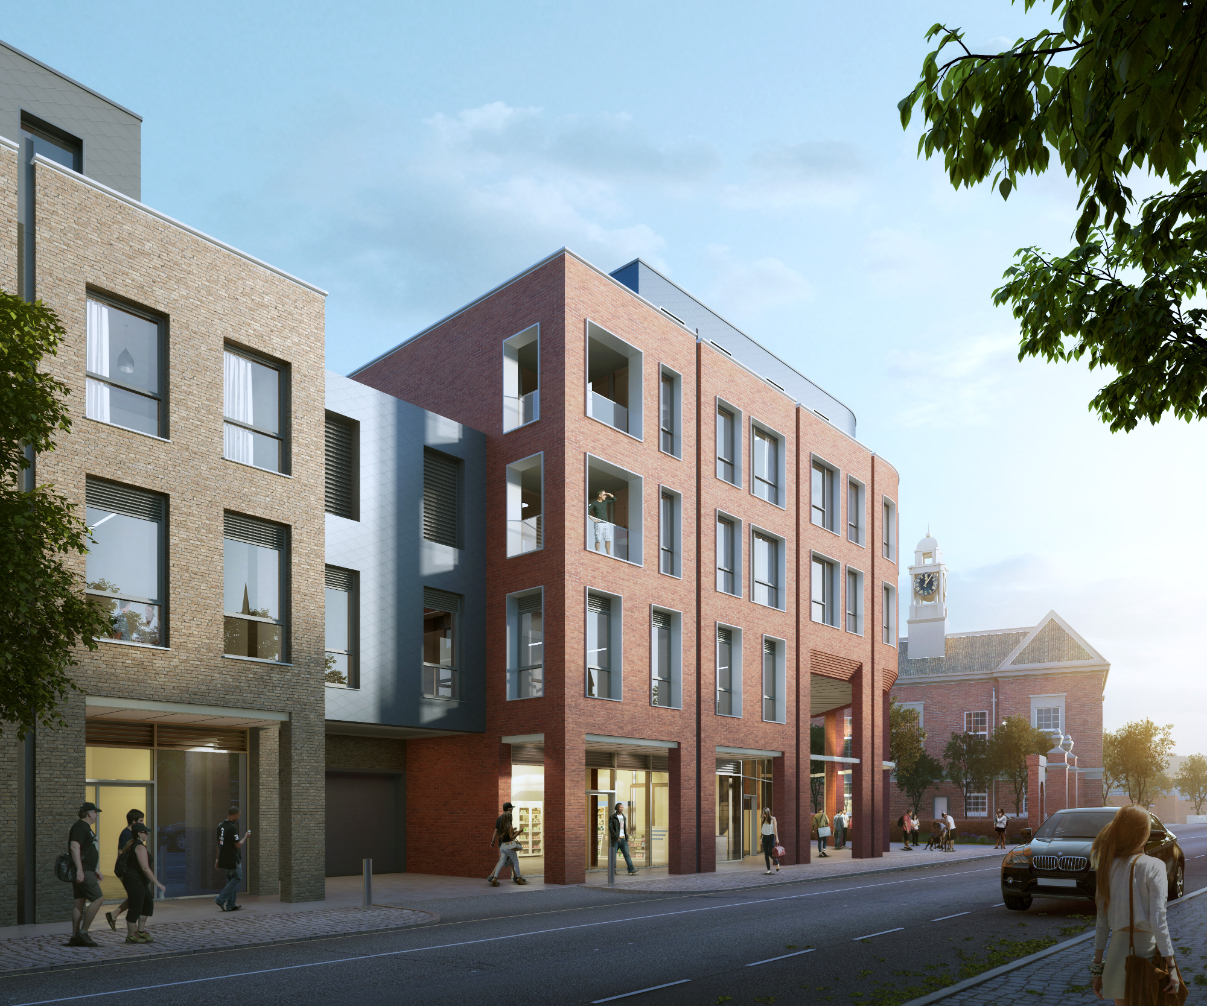 artist impression of new buildings in Braintree town centre